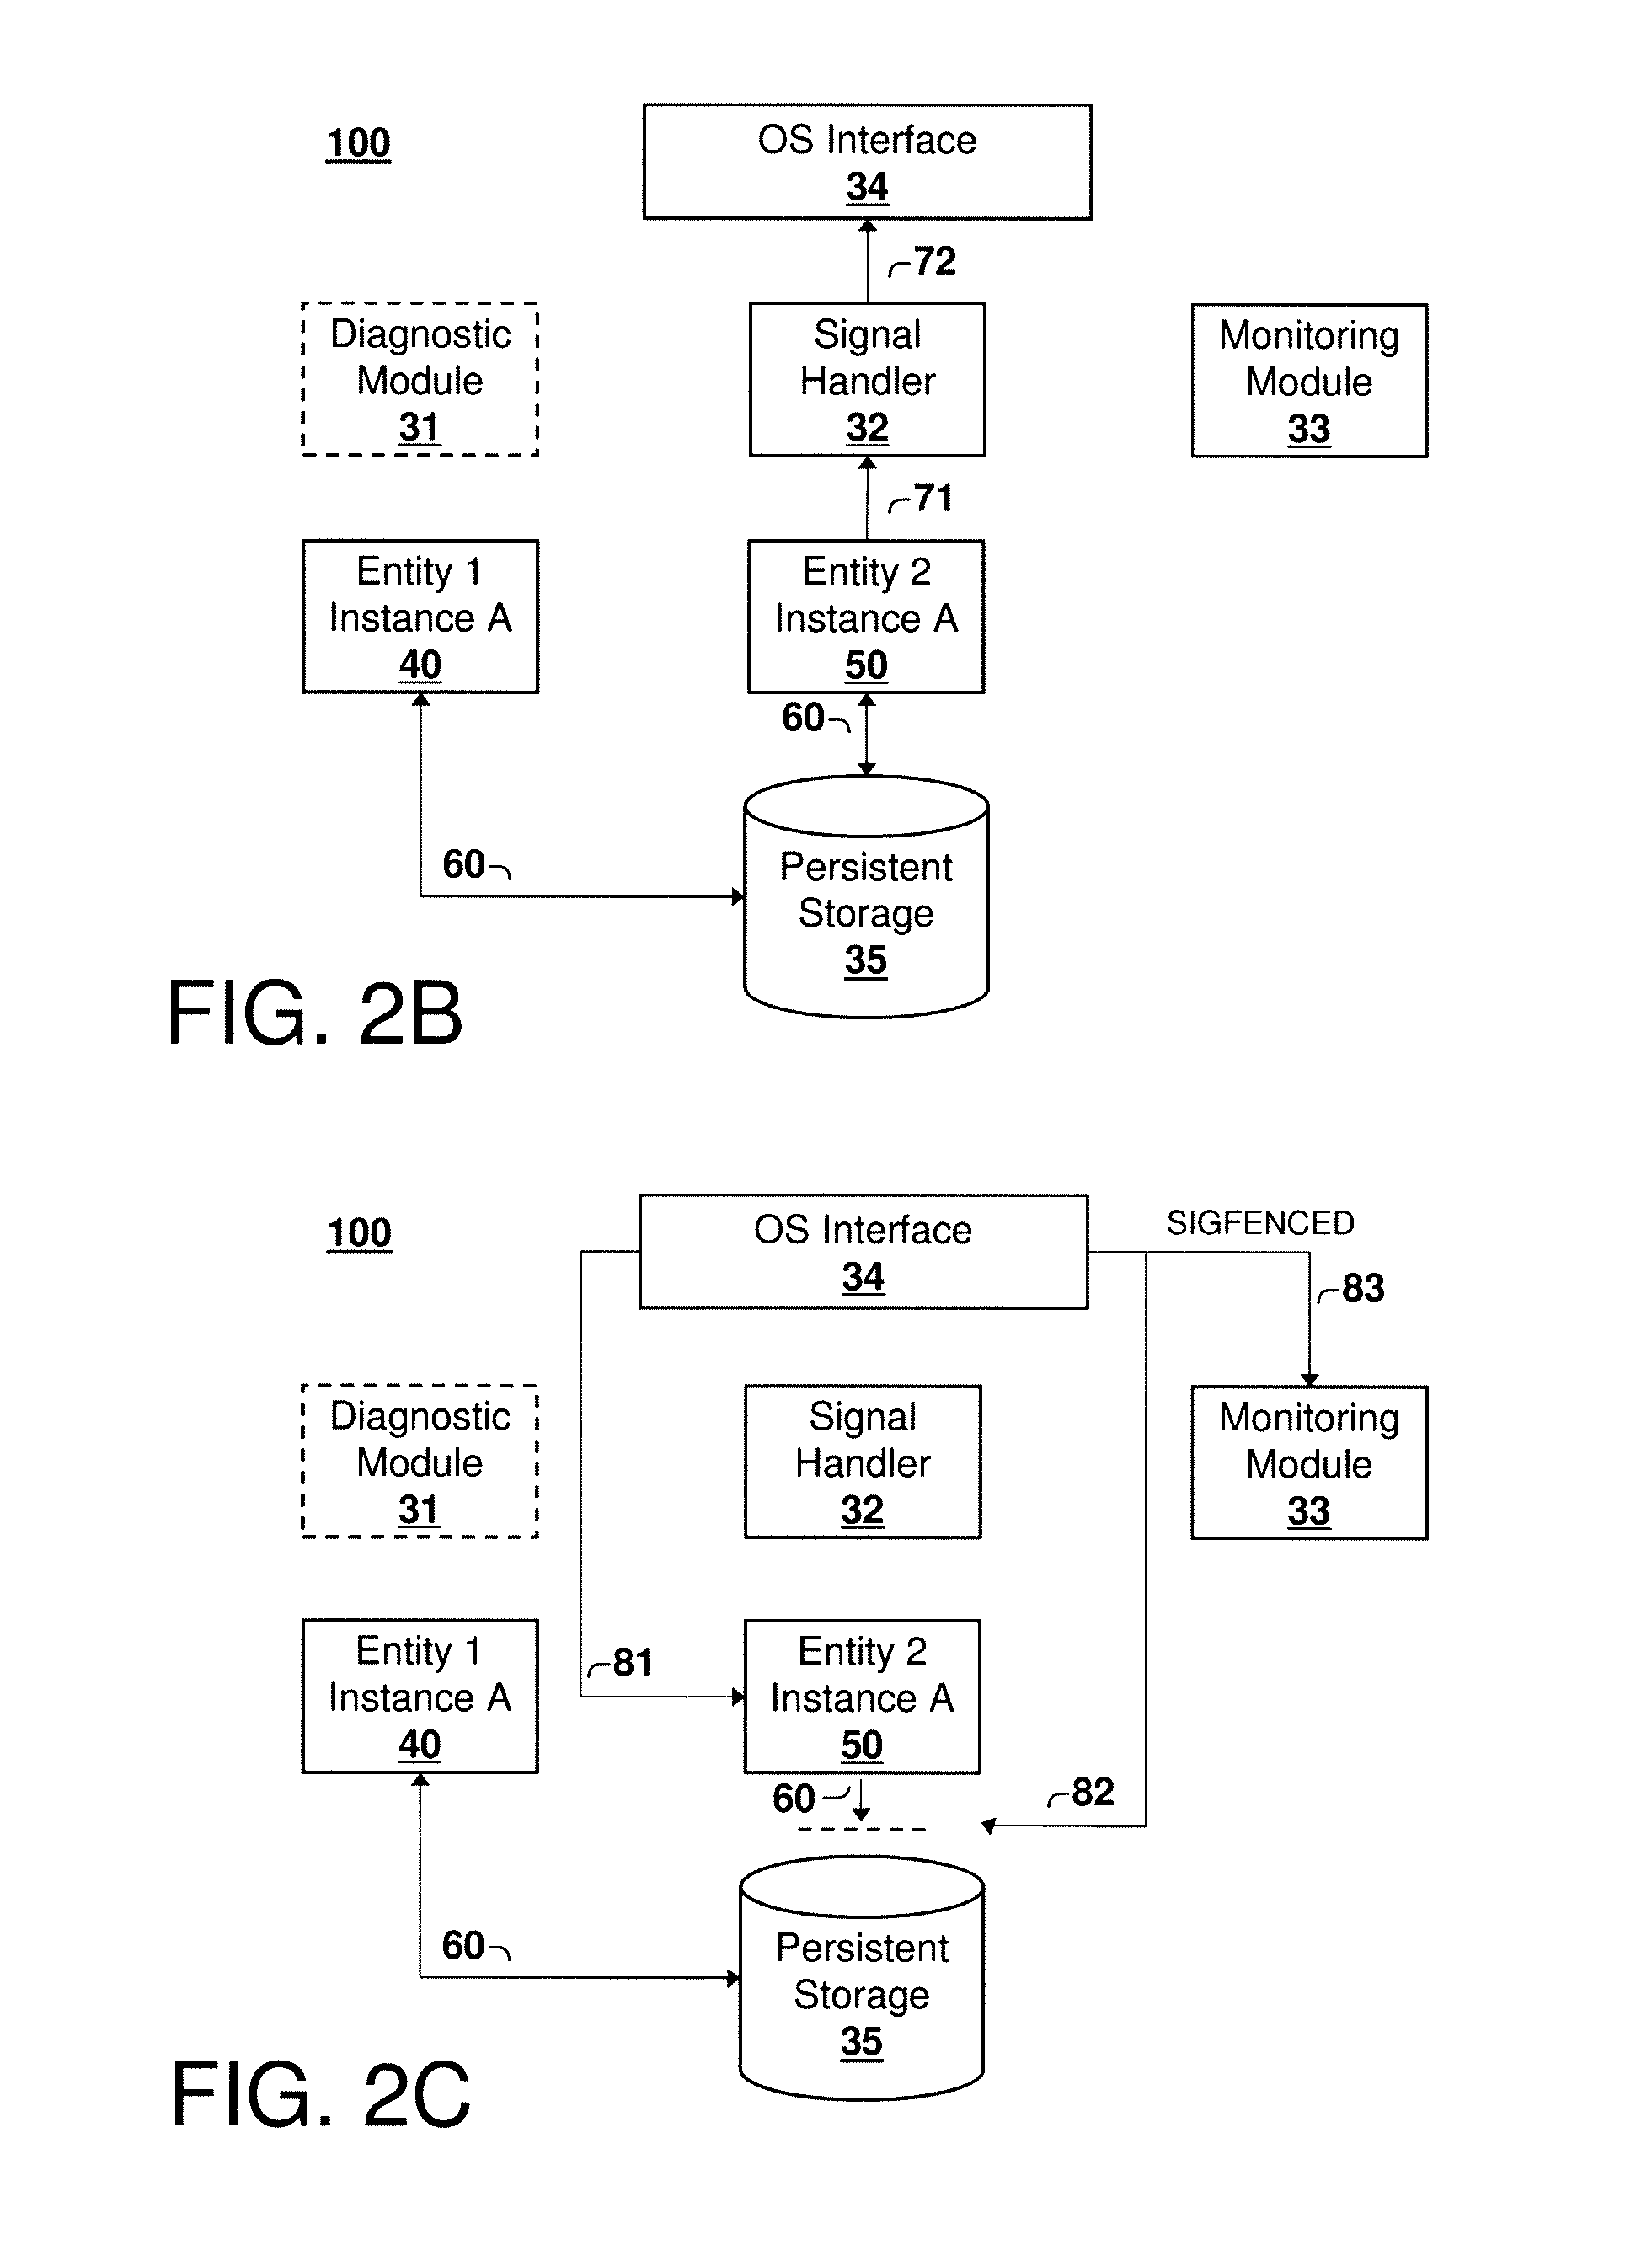 Failure detection and fencing in a computing system